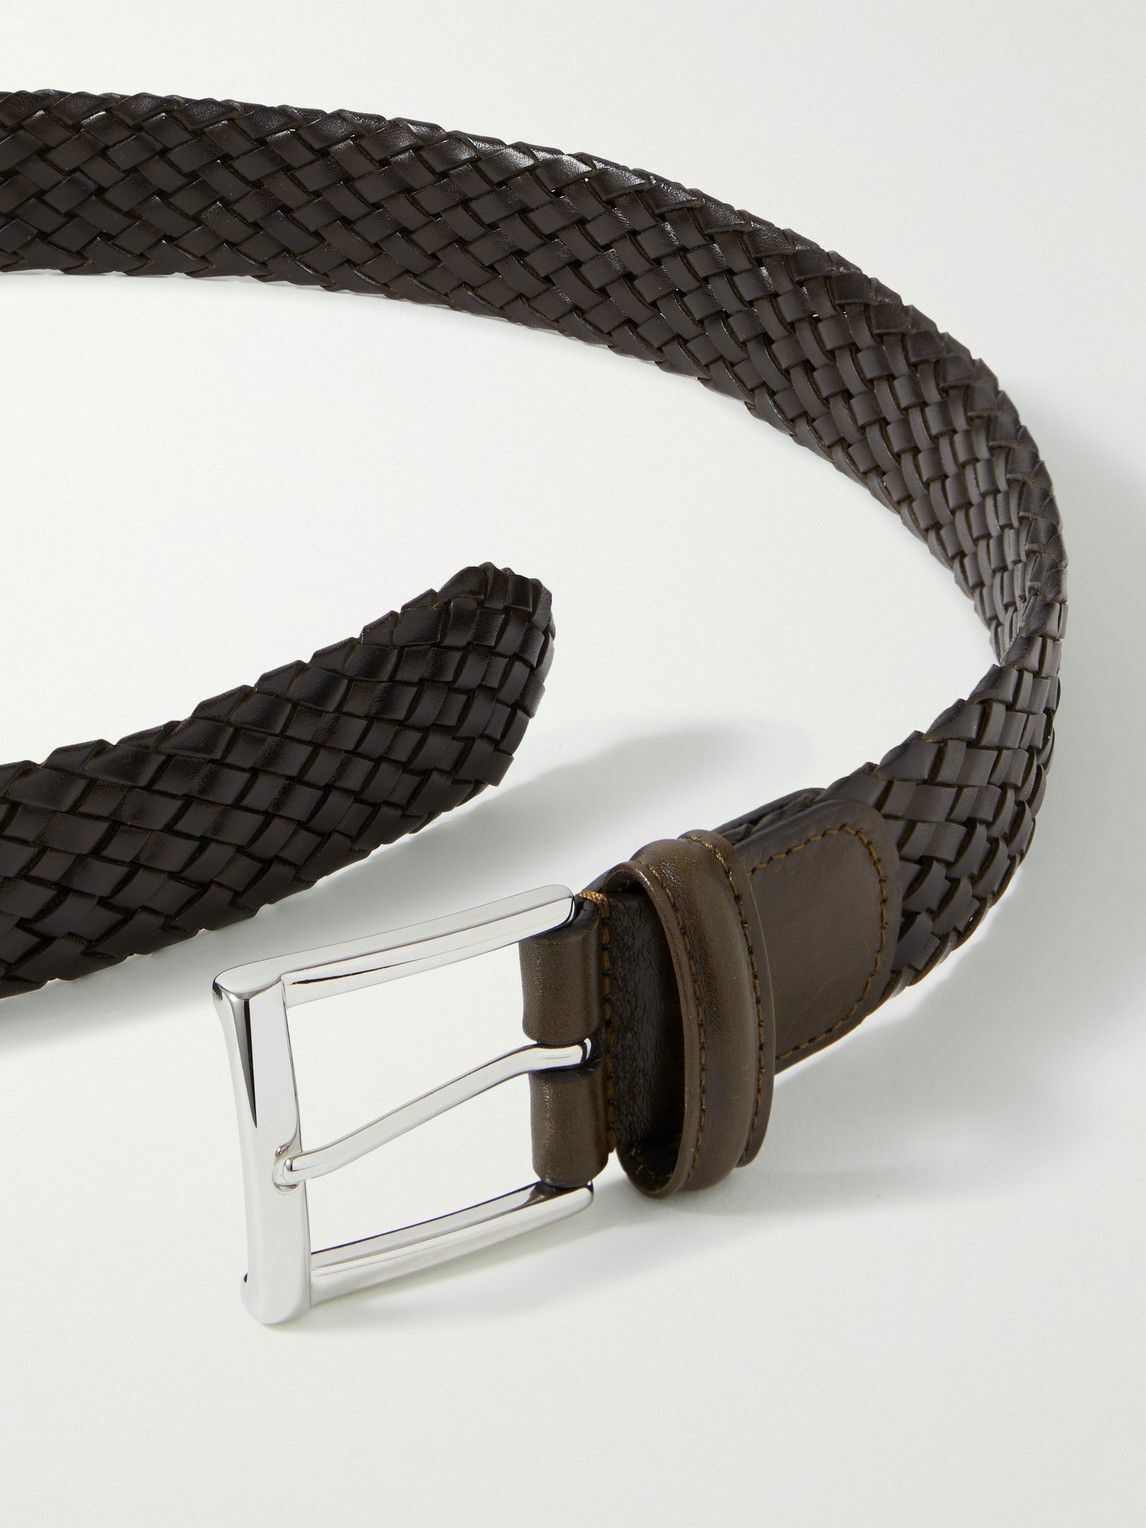 Anderson's - 3.5cm Woven Leather Belt - Brown Anderson's